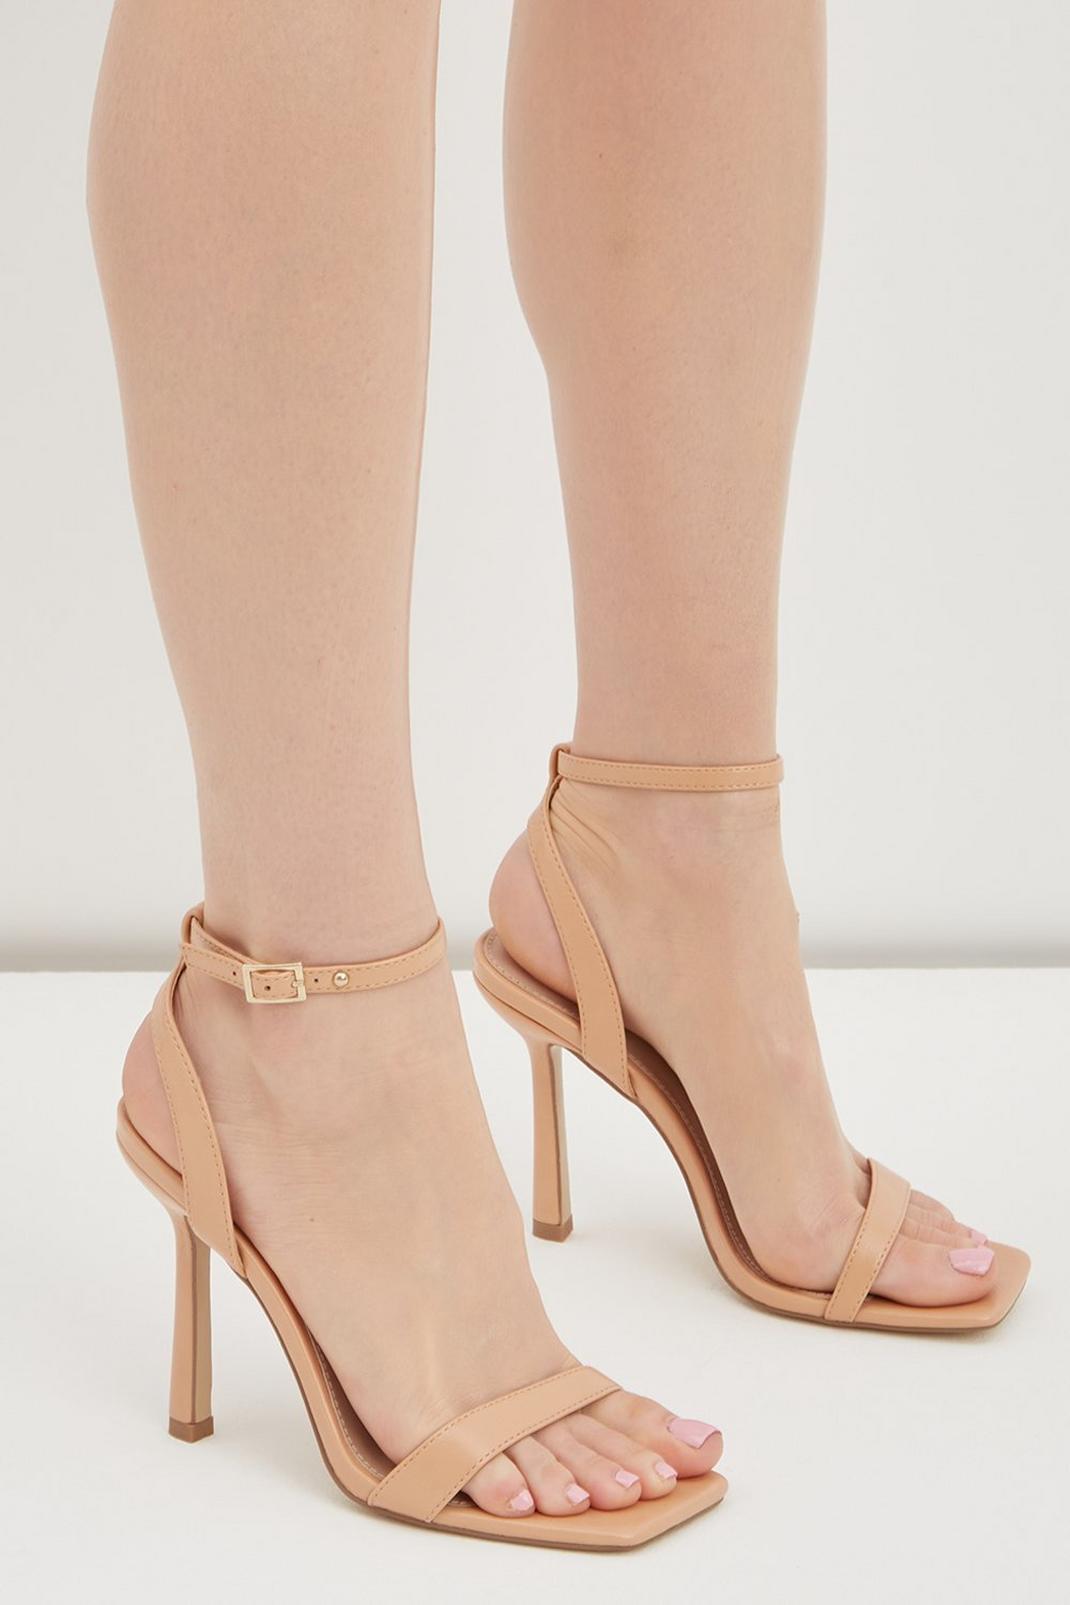 Blush Sola Square Toe Barely There Heels image number 1